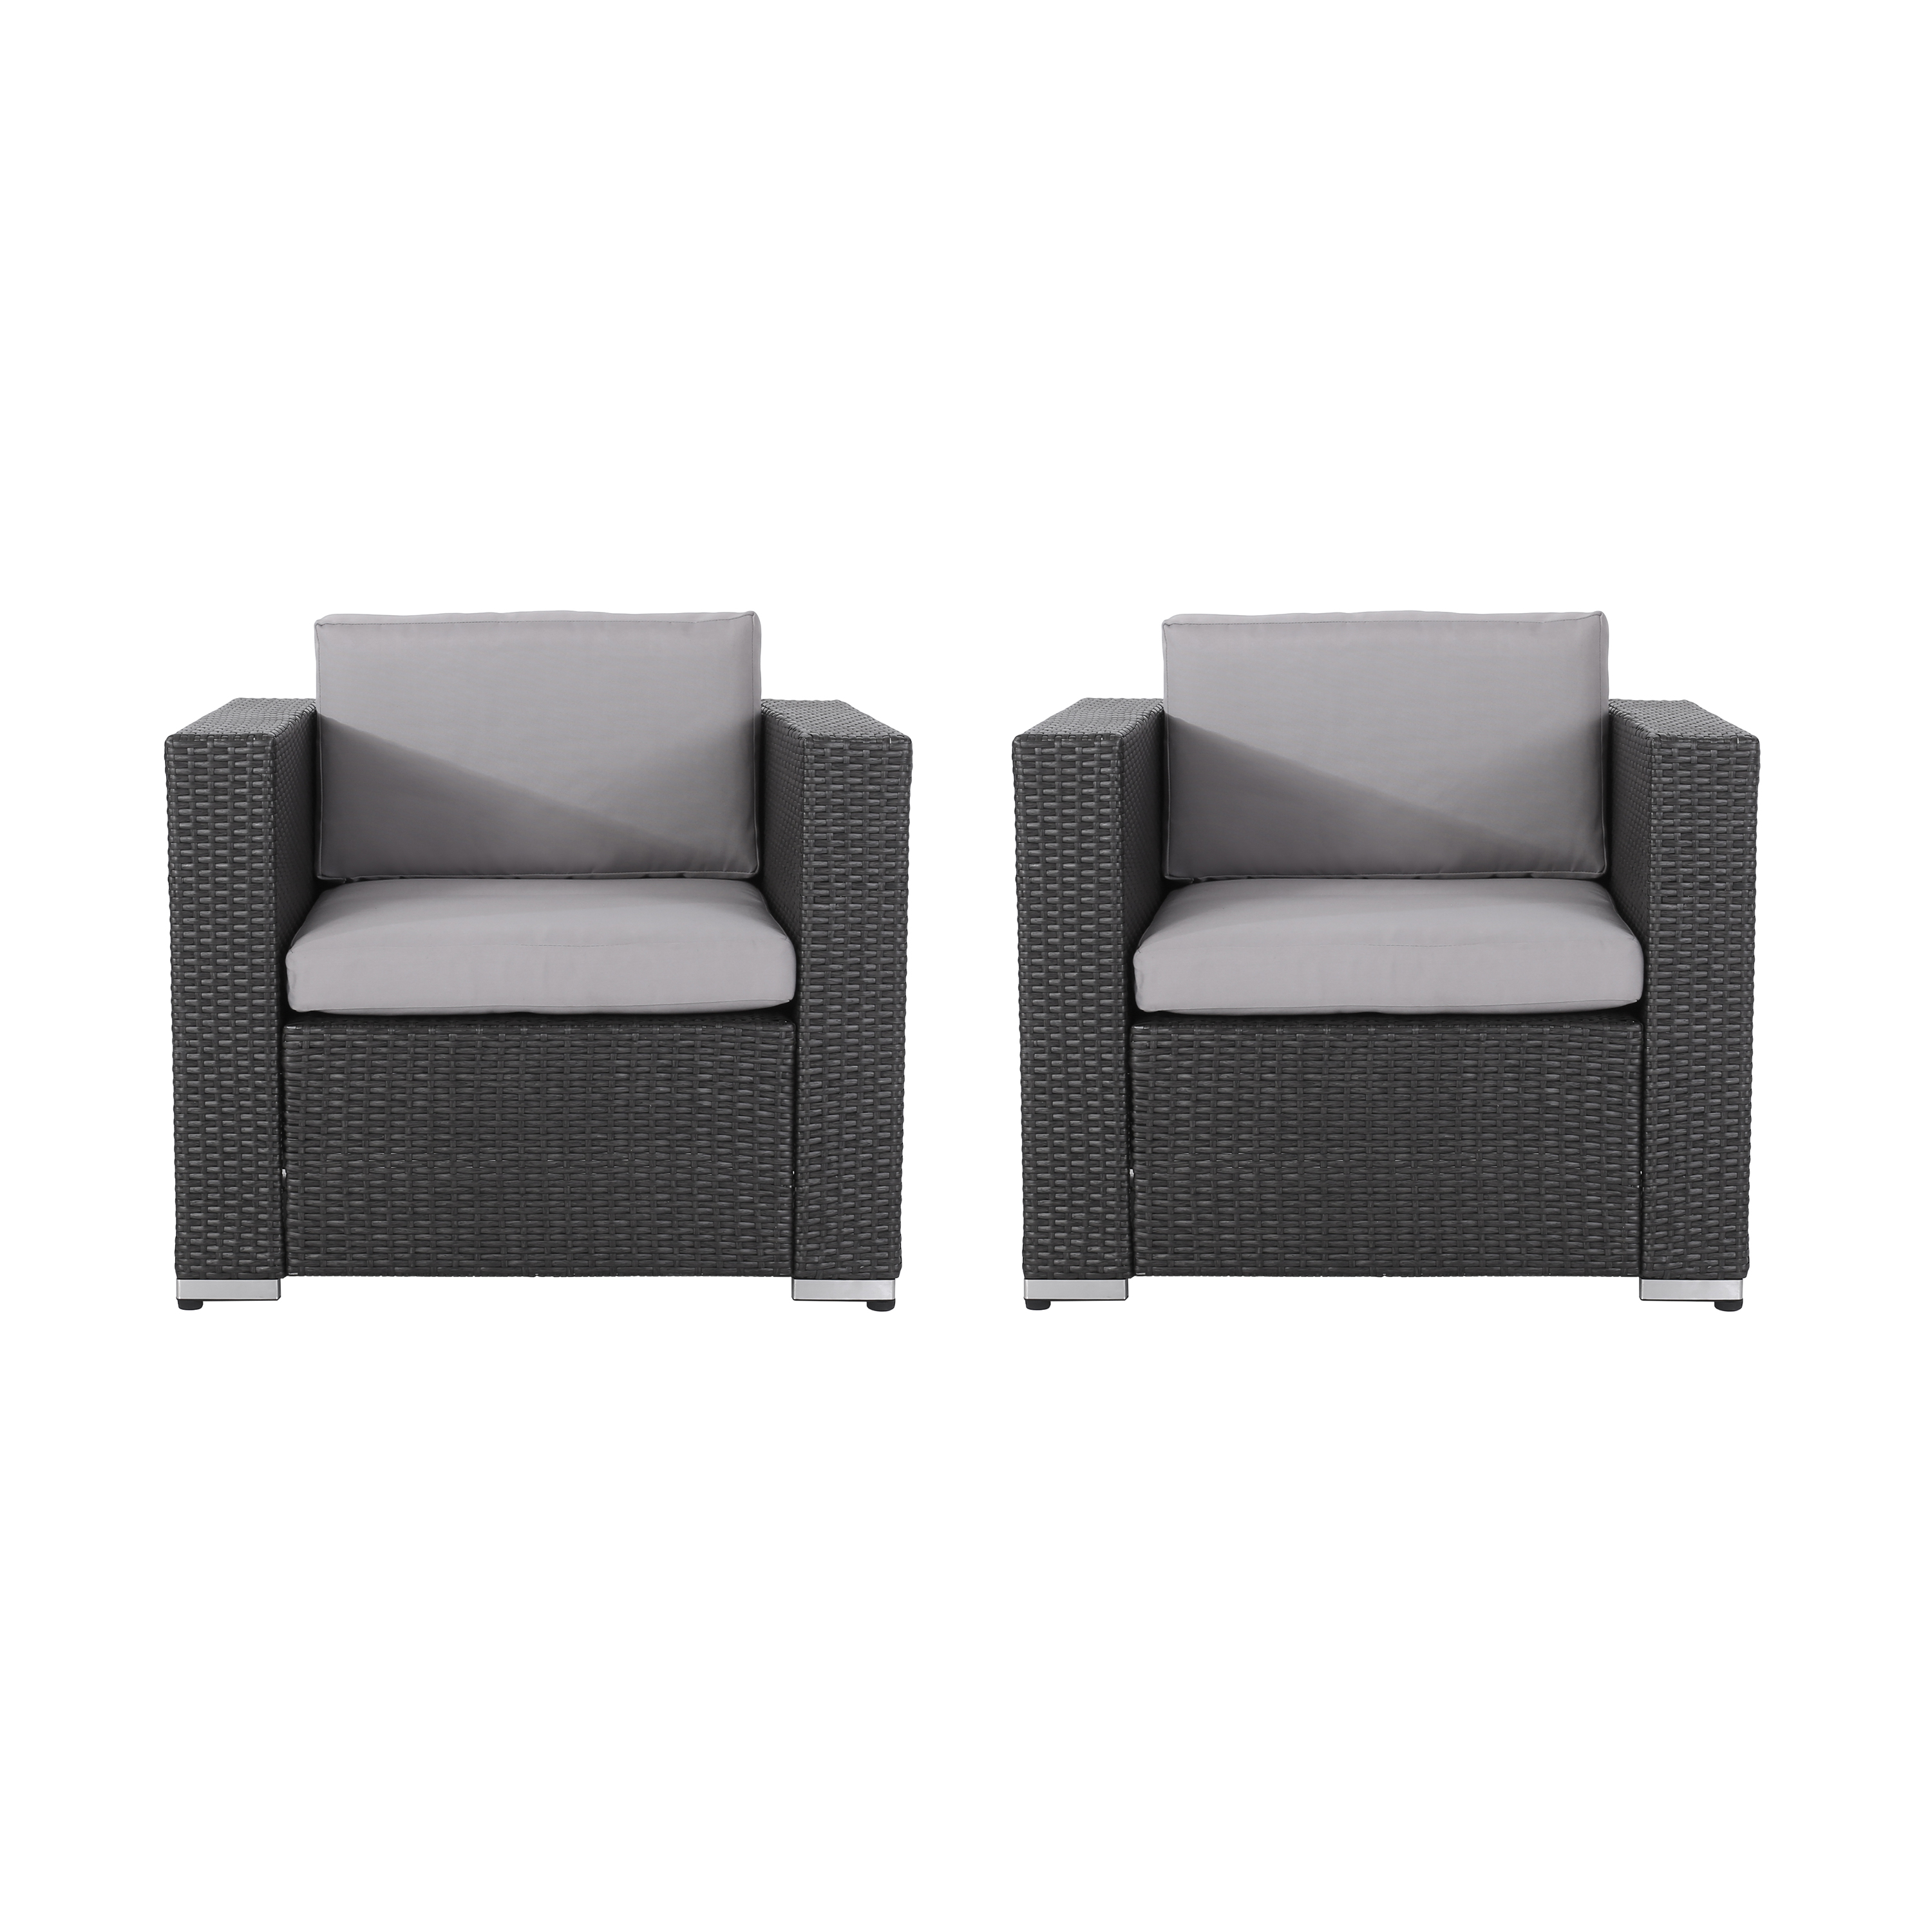 Verin Outdoor Wicker Club Chair with Water Resistant Fabric Cushions, Set of 2, Grey/ Silver - image 1 of 9